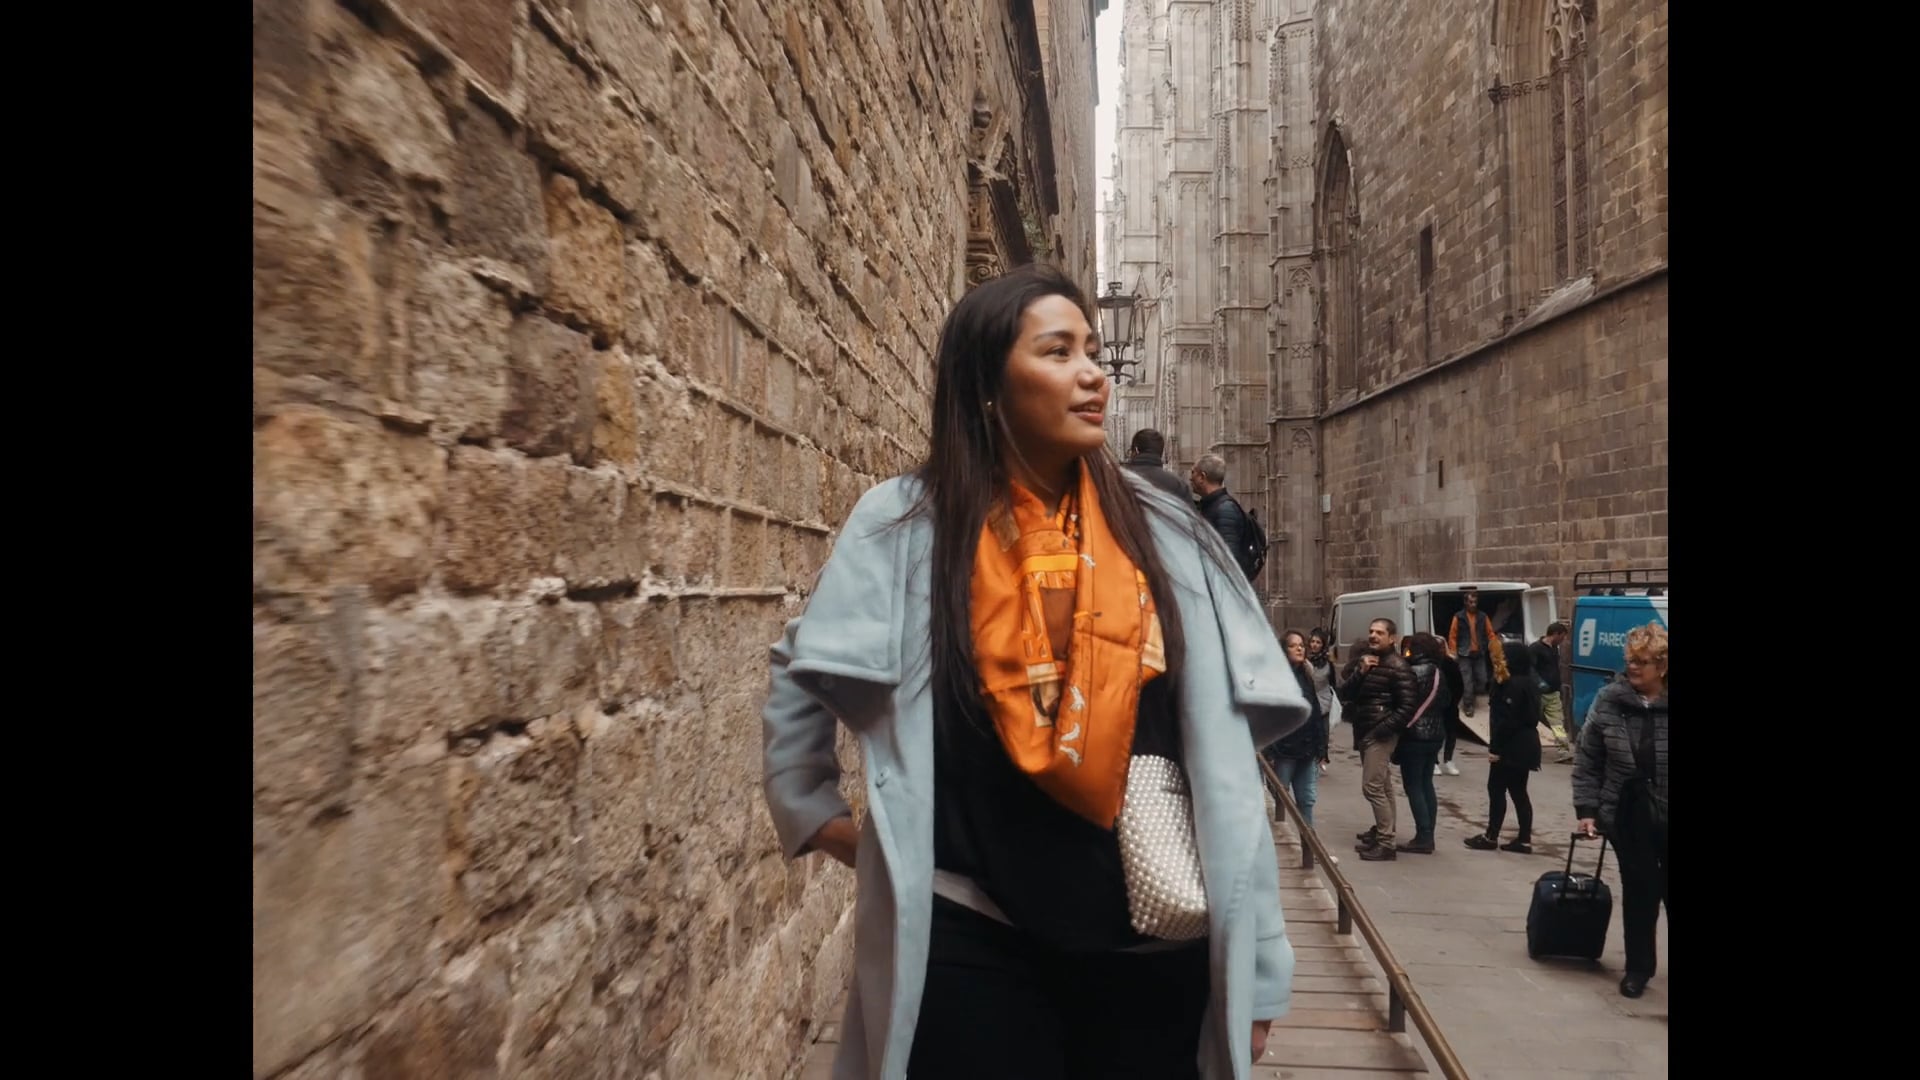 A Day in a Film Gotic Tour: Yasmine & Ihsan